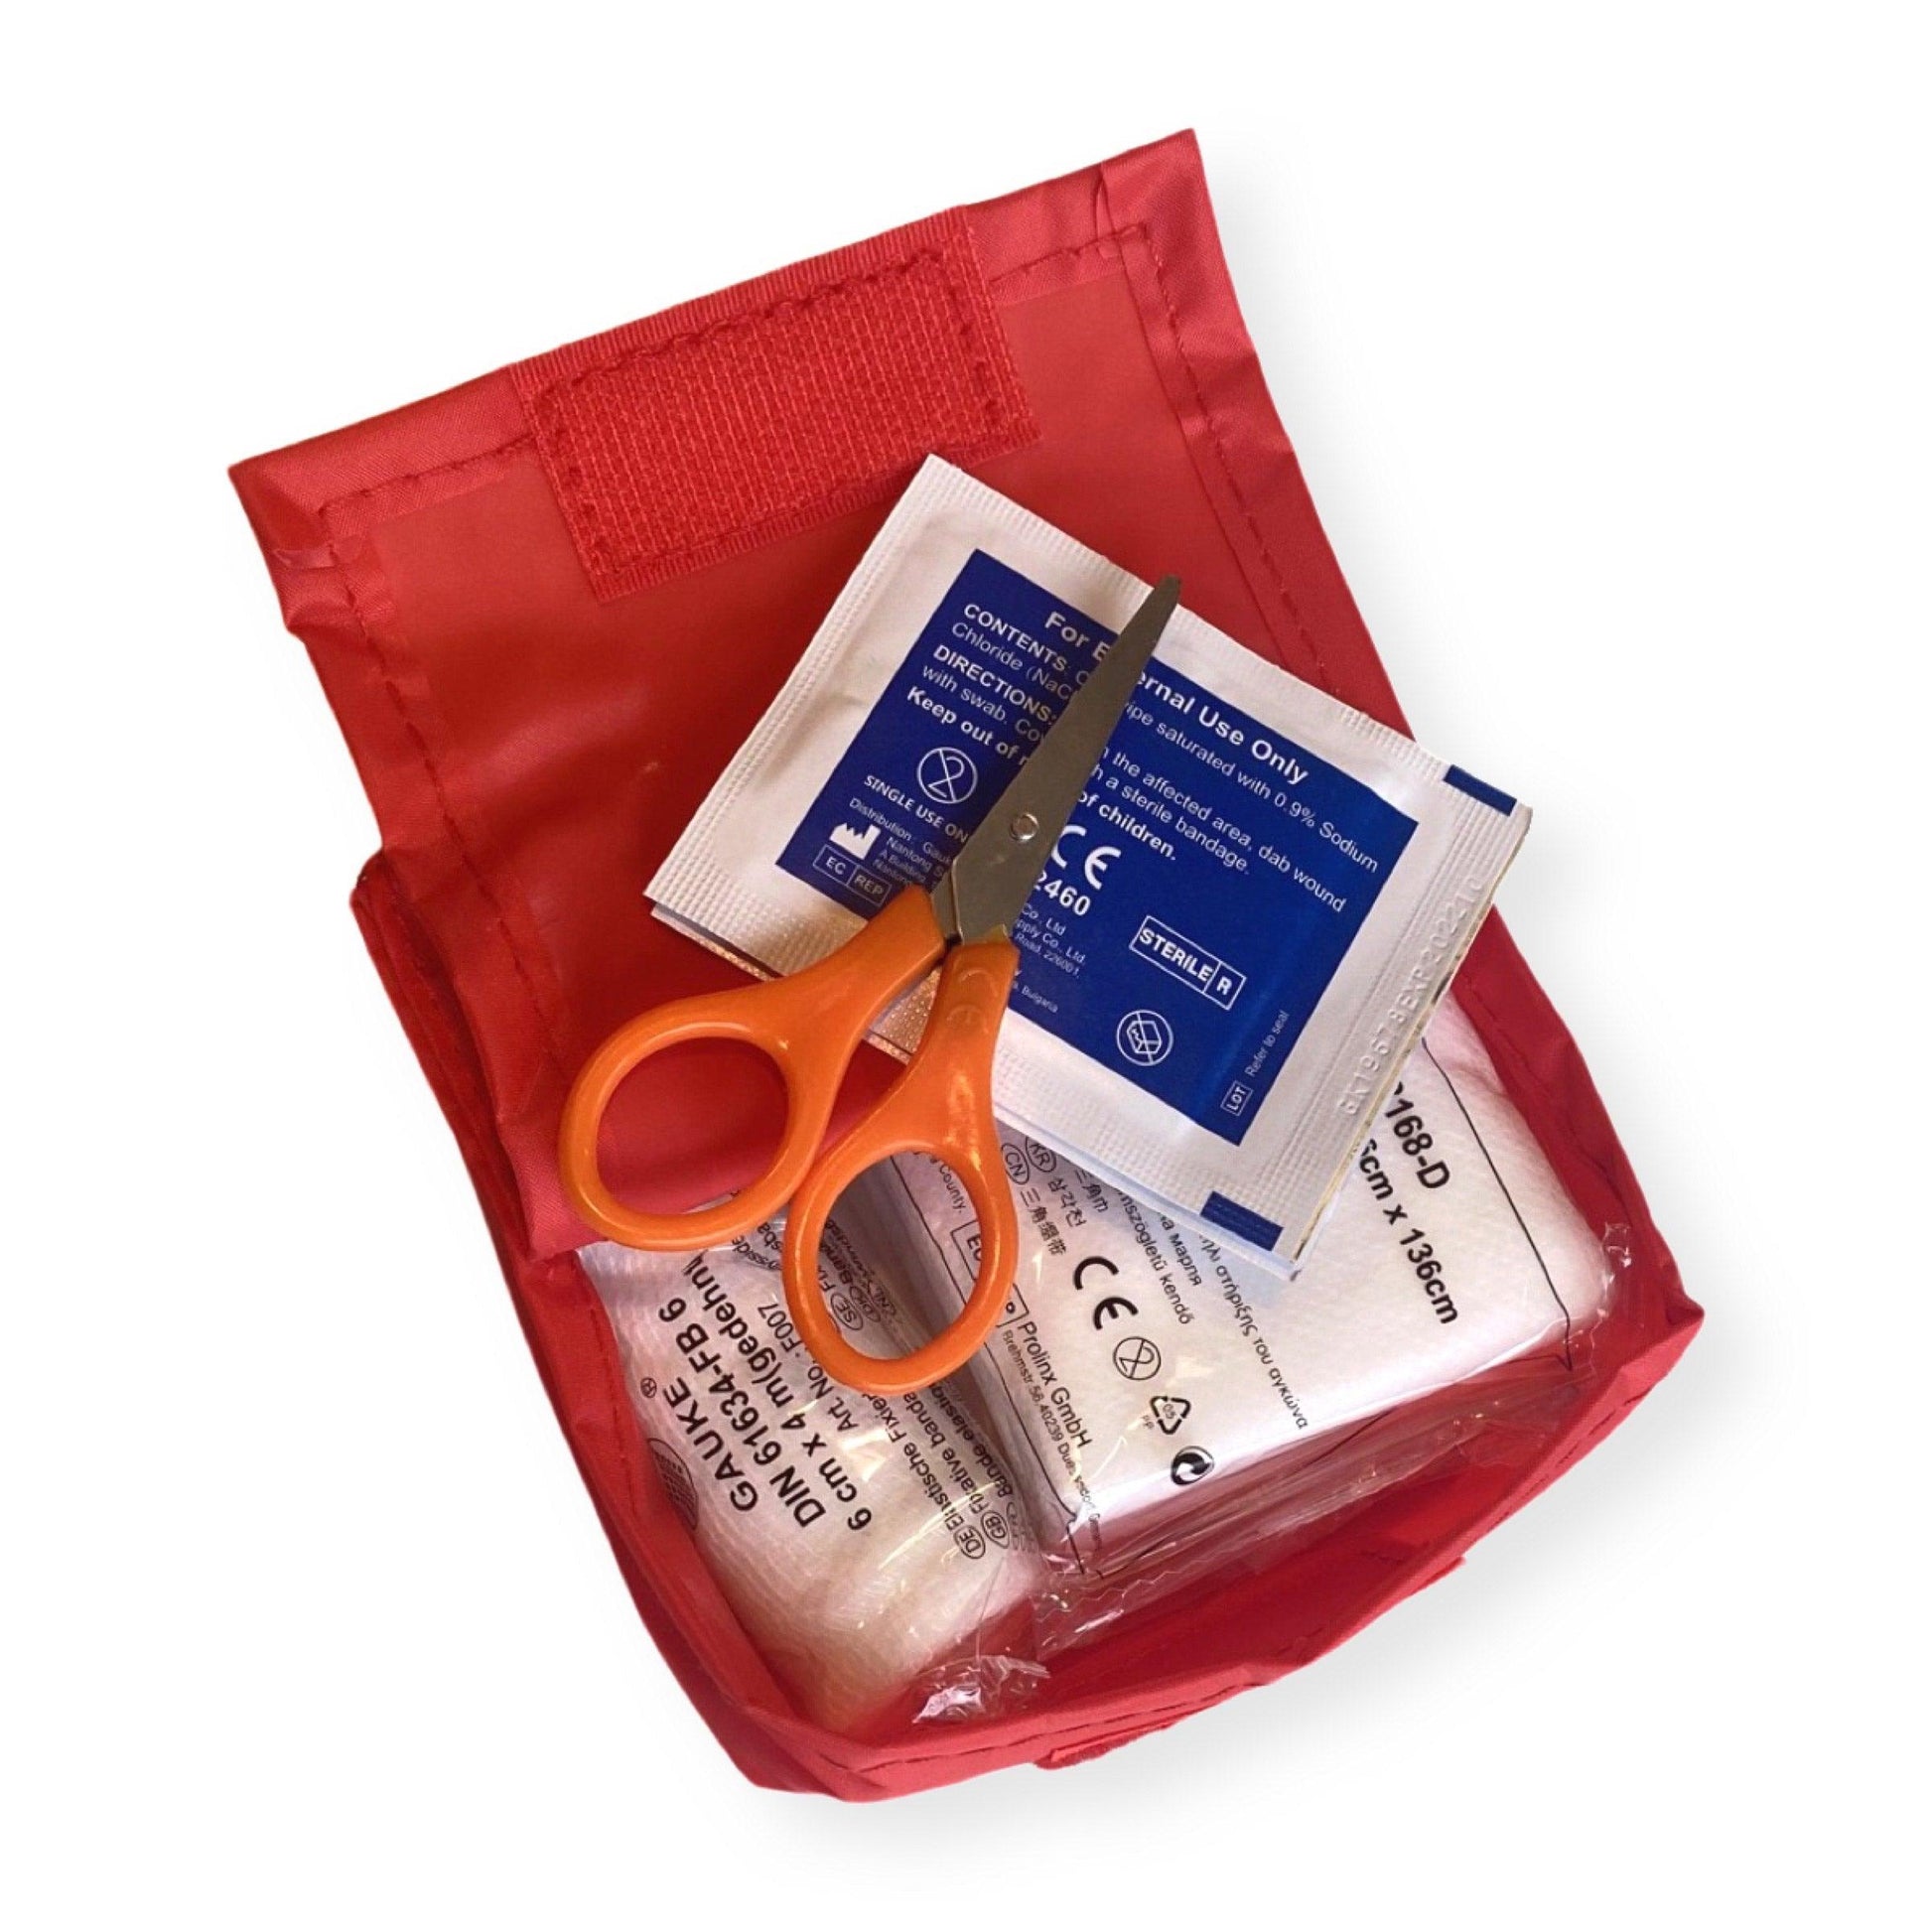 First Aid Kit: small 1st aid kit. Emergency mini first aid kit for minor medial emergencies. This mini first aid kit is stored in a lightweight, compact carry case. Great for people on the move and ideal for treating minor injuries.